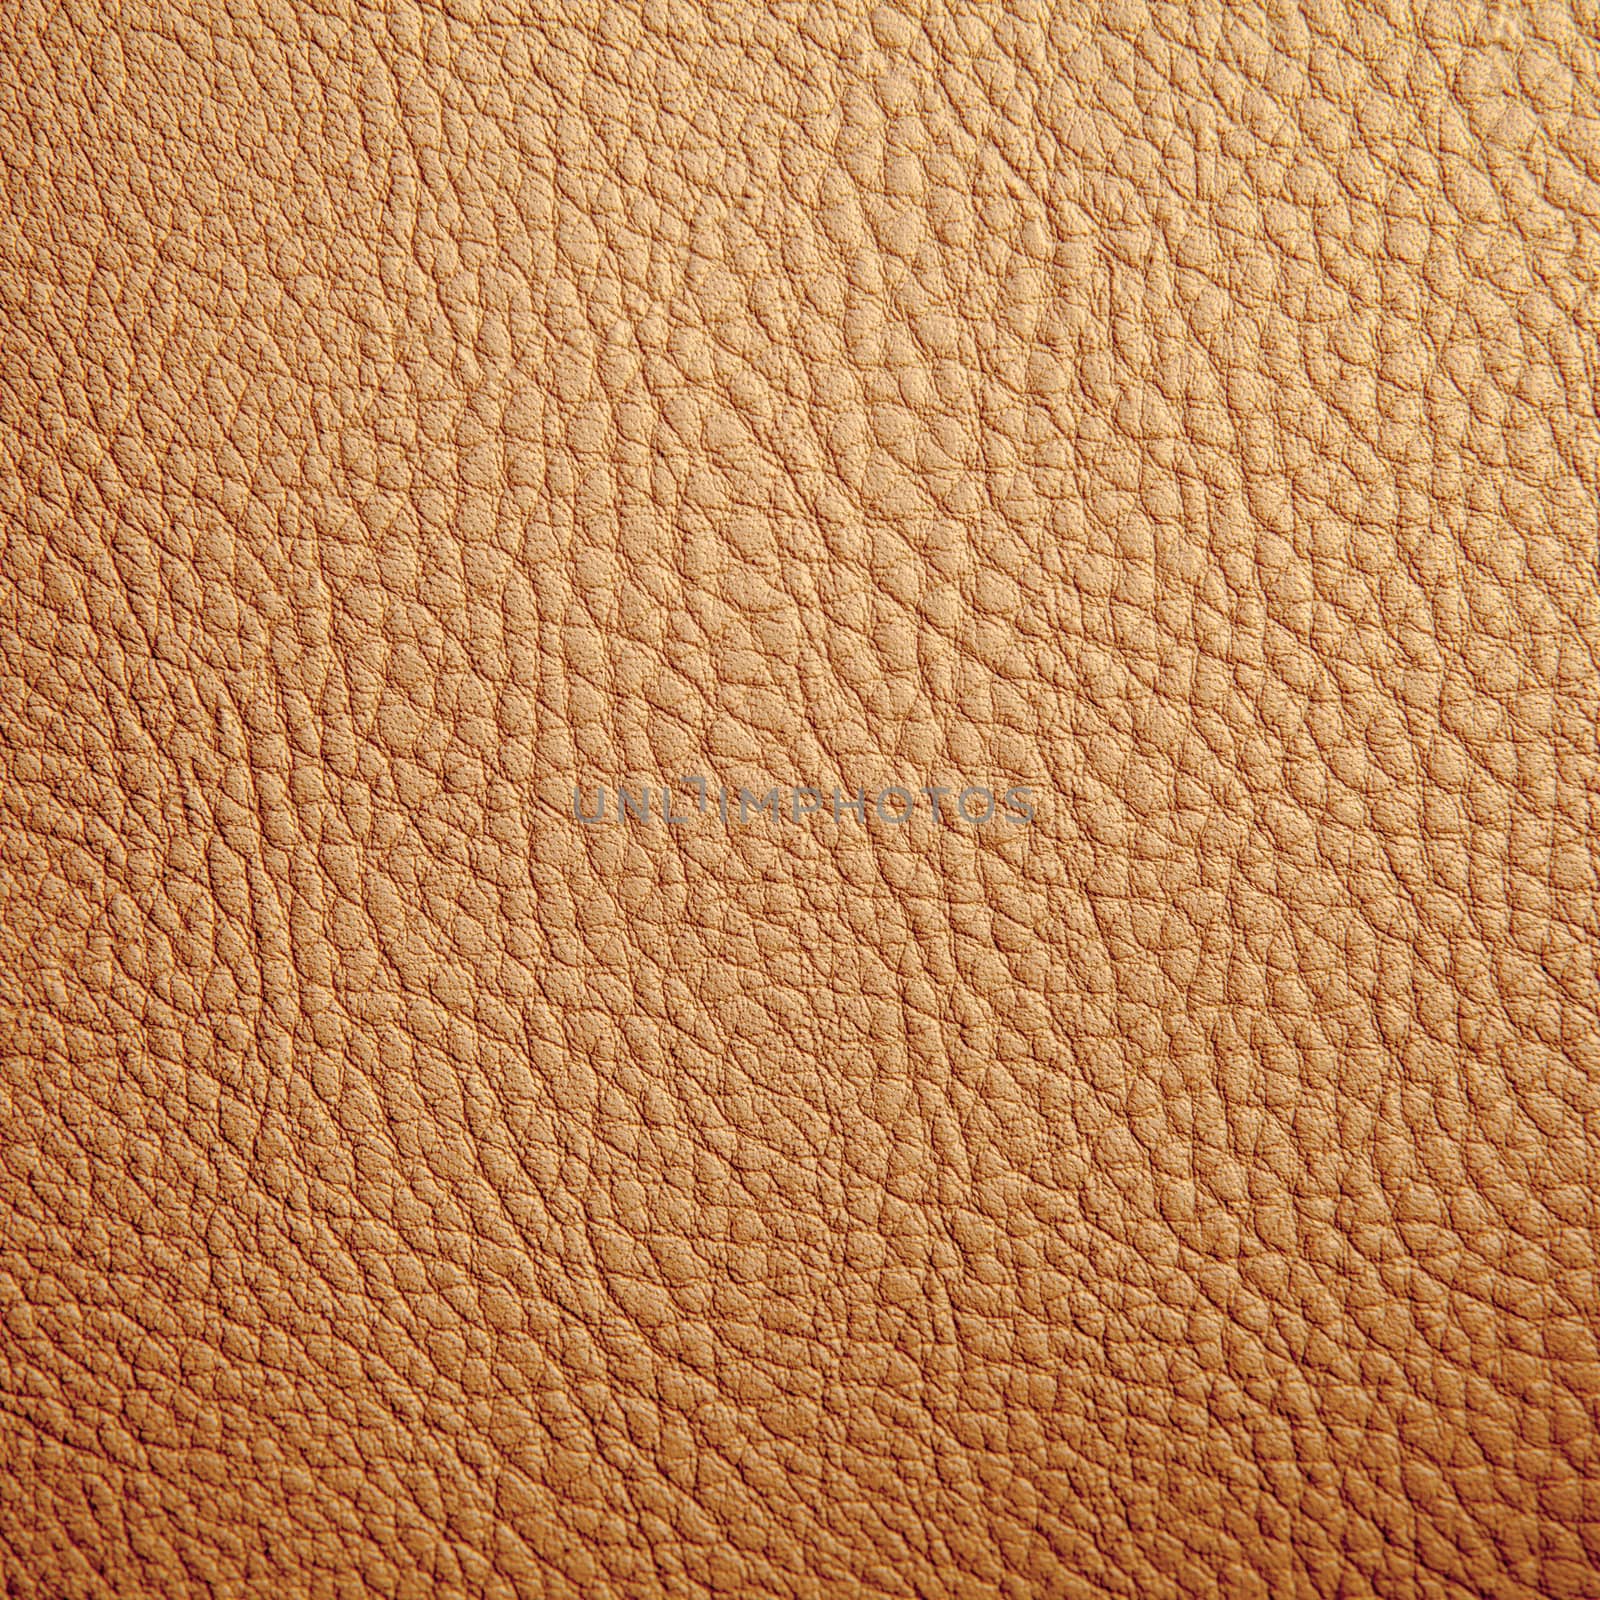 Tan leather texture background. Close-up photo